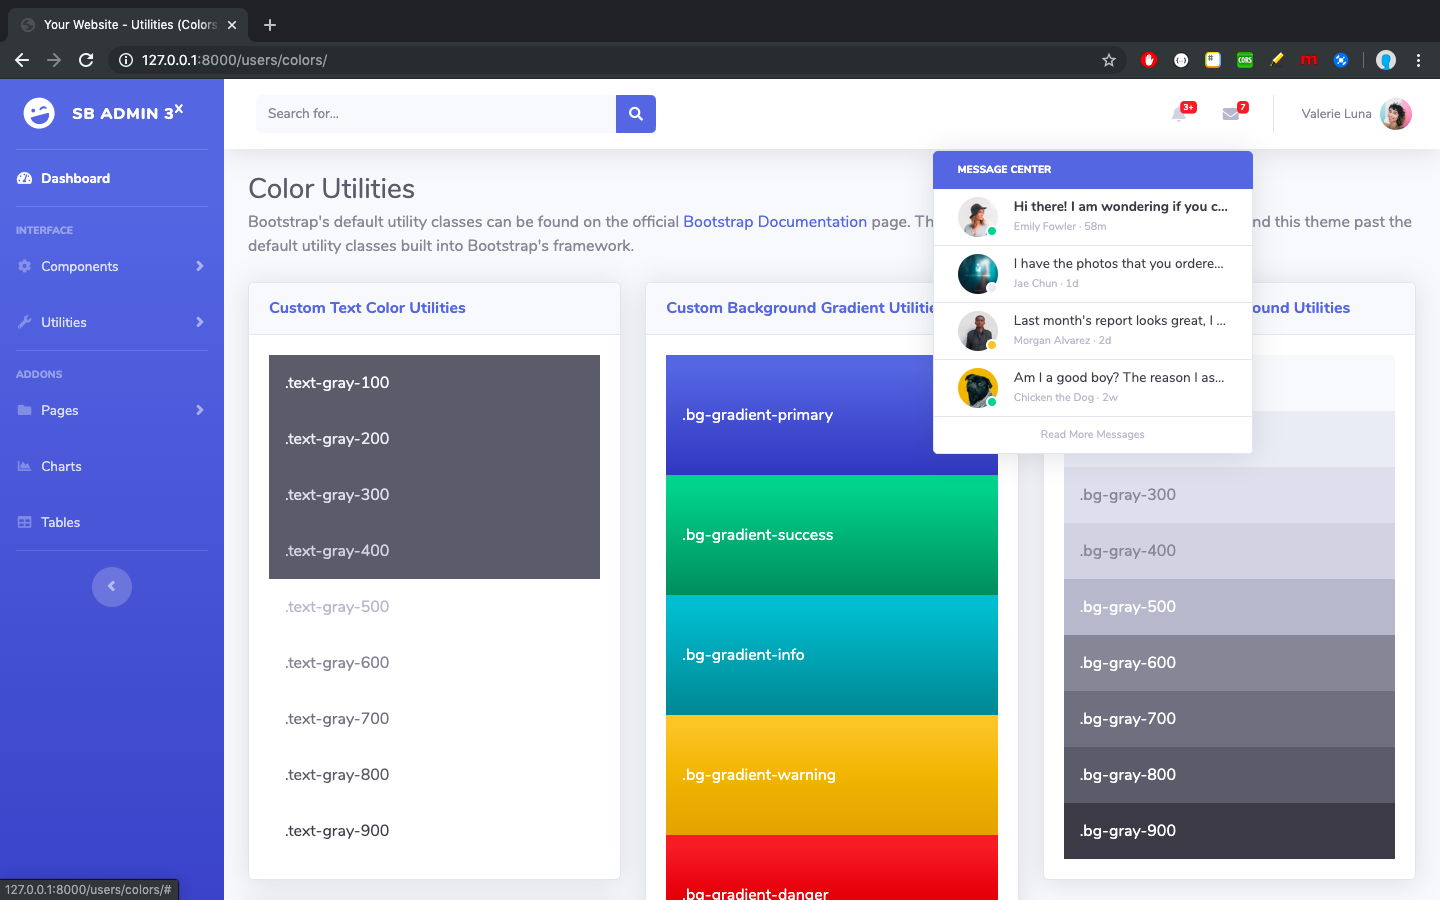 Colors & Notifications